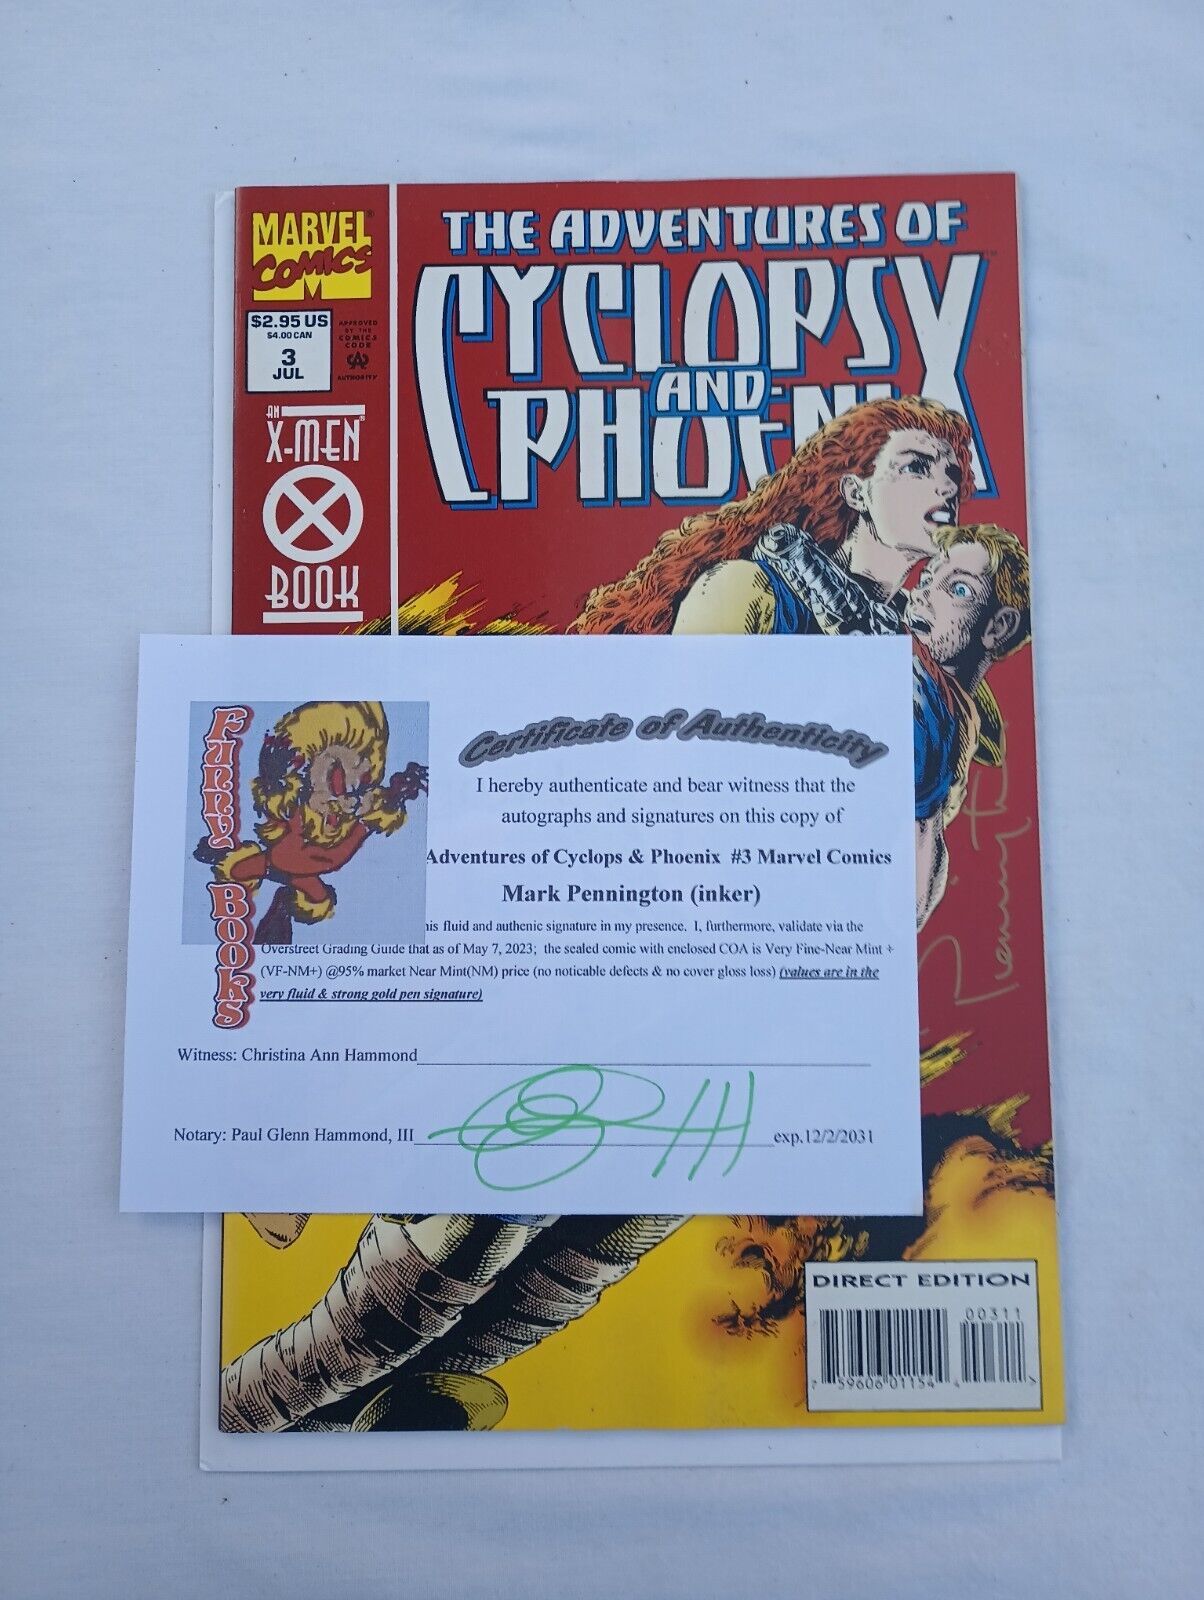 The Adventures of Cyclops and Phoenix #3 Marvel Comics signed by Mark Pennington